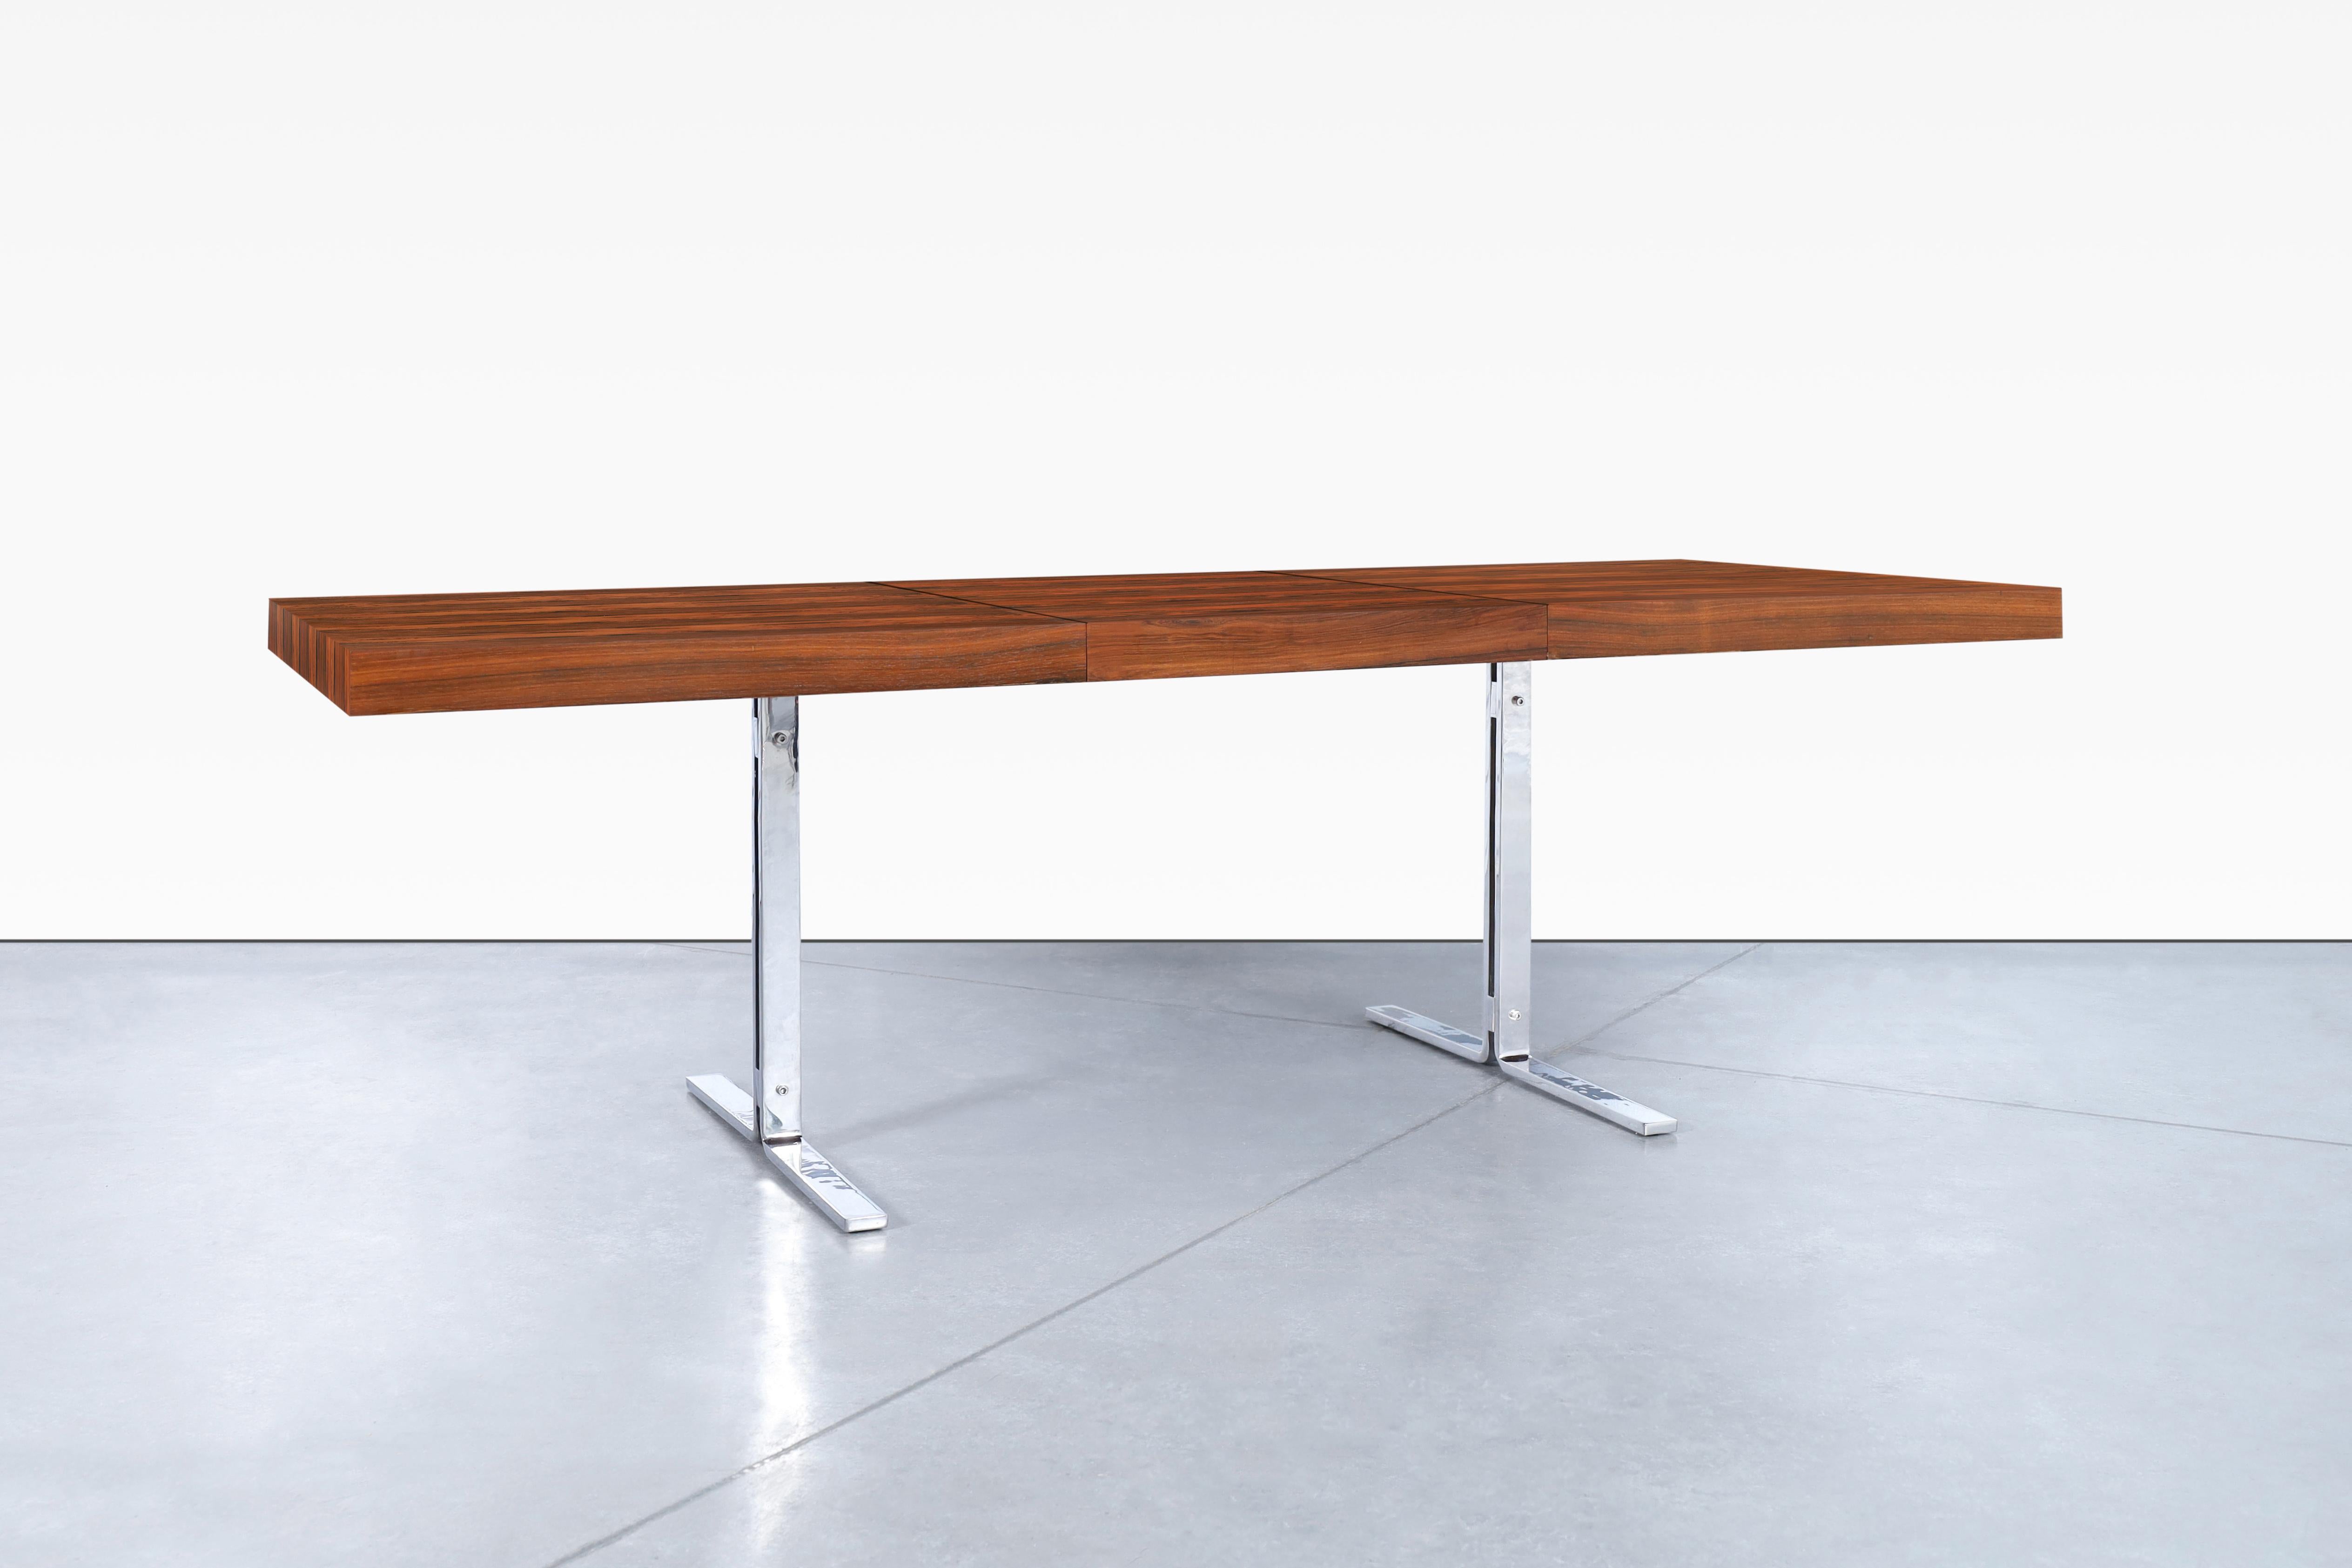 Plated Danish Modern Rosewood Dining Table by Poul Nørreklit for Georg Petersens For Sale